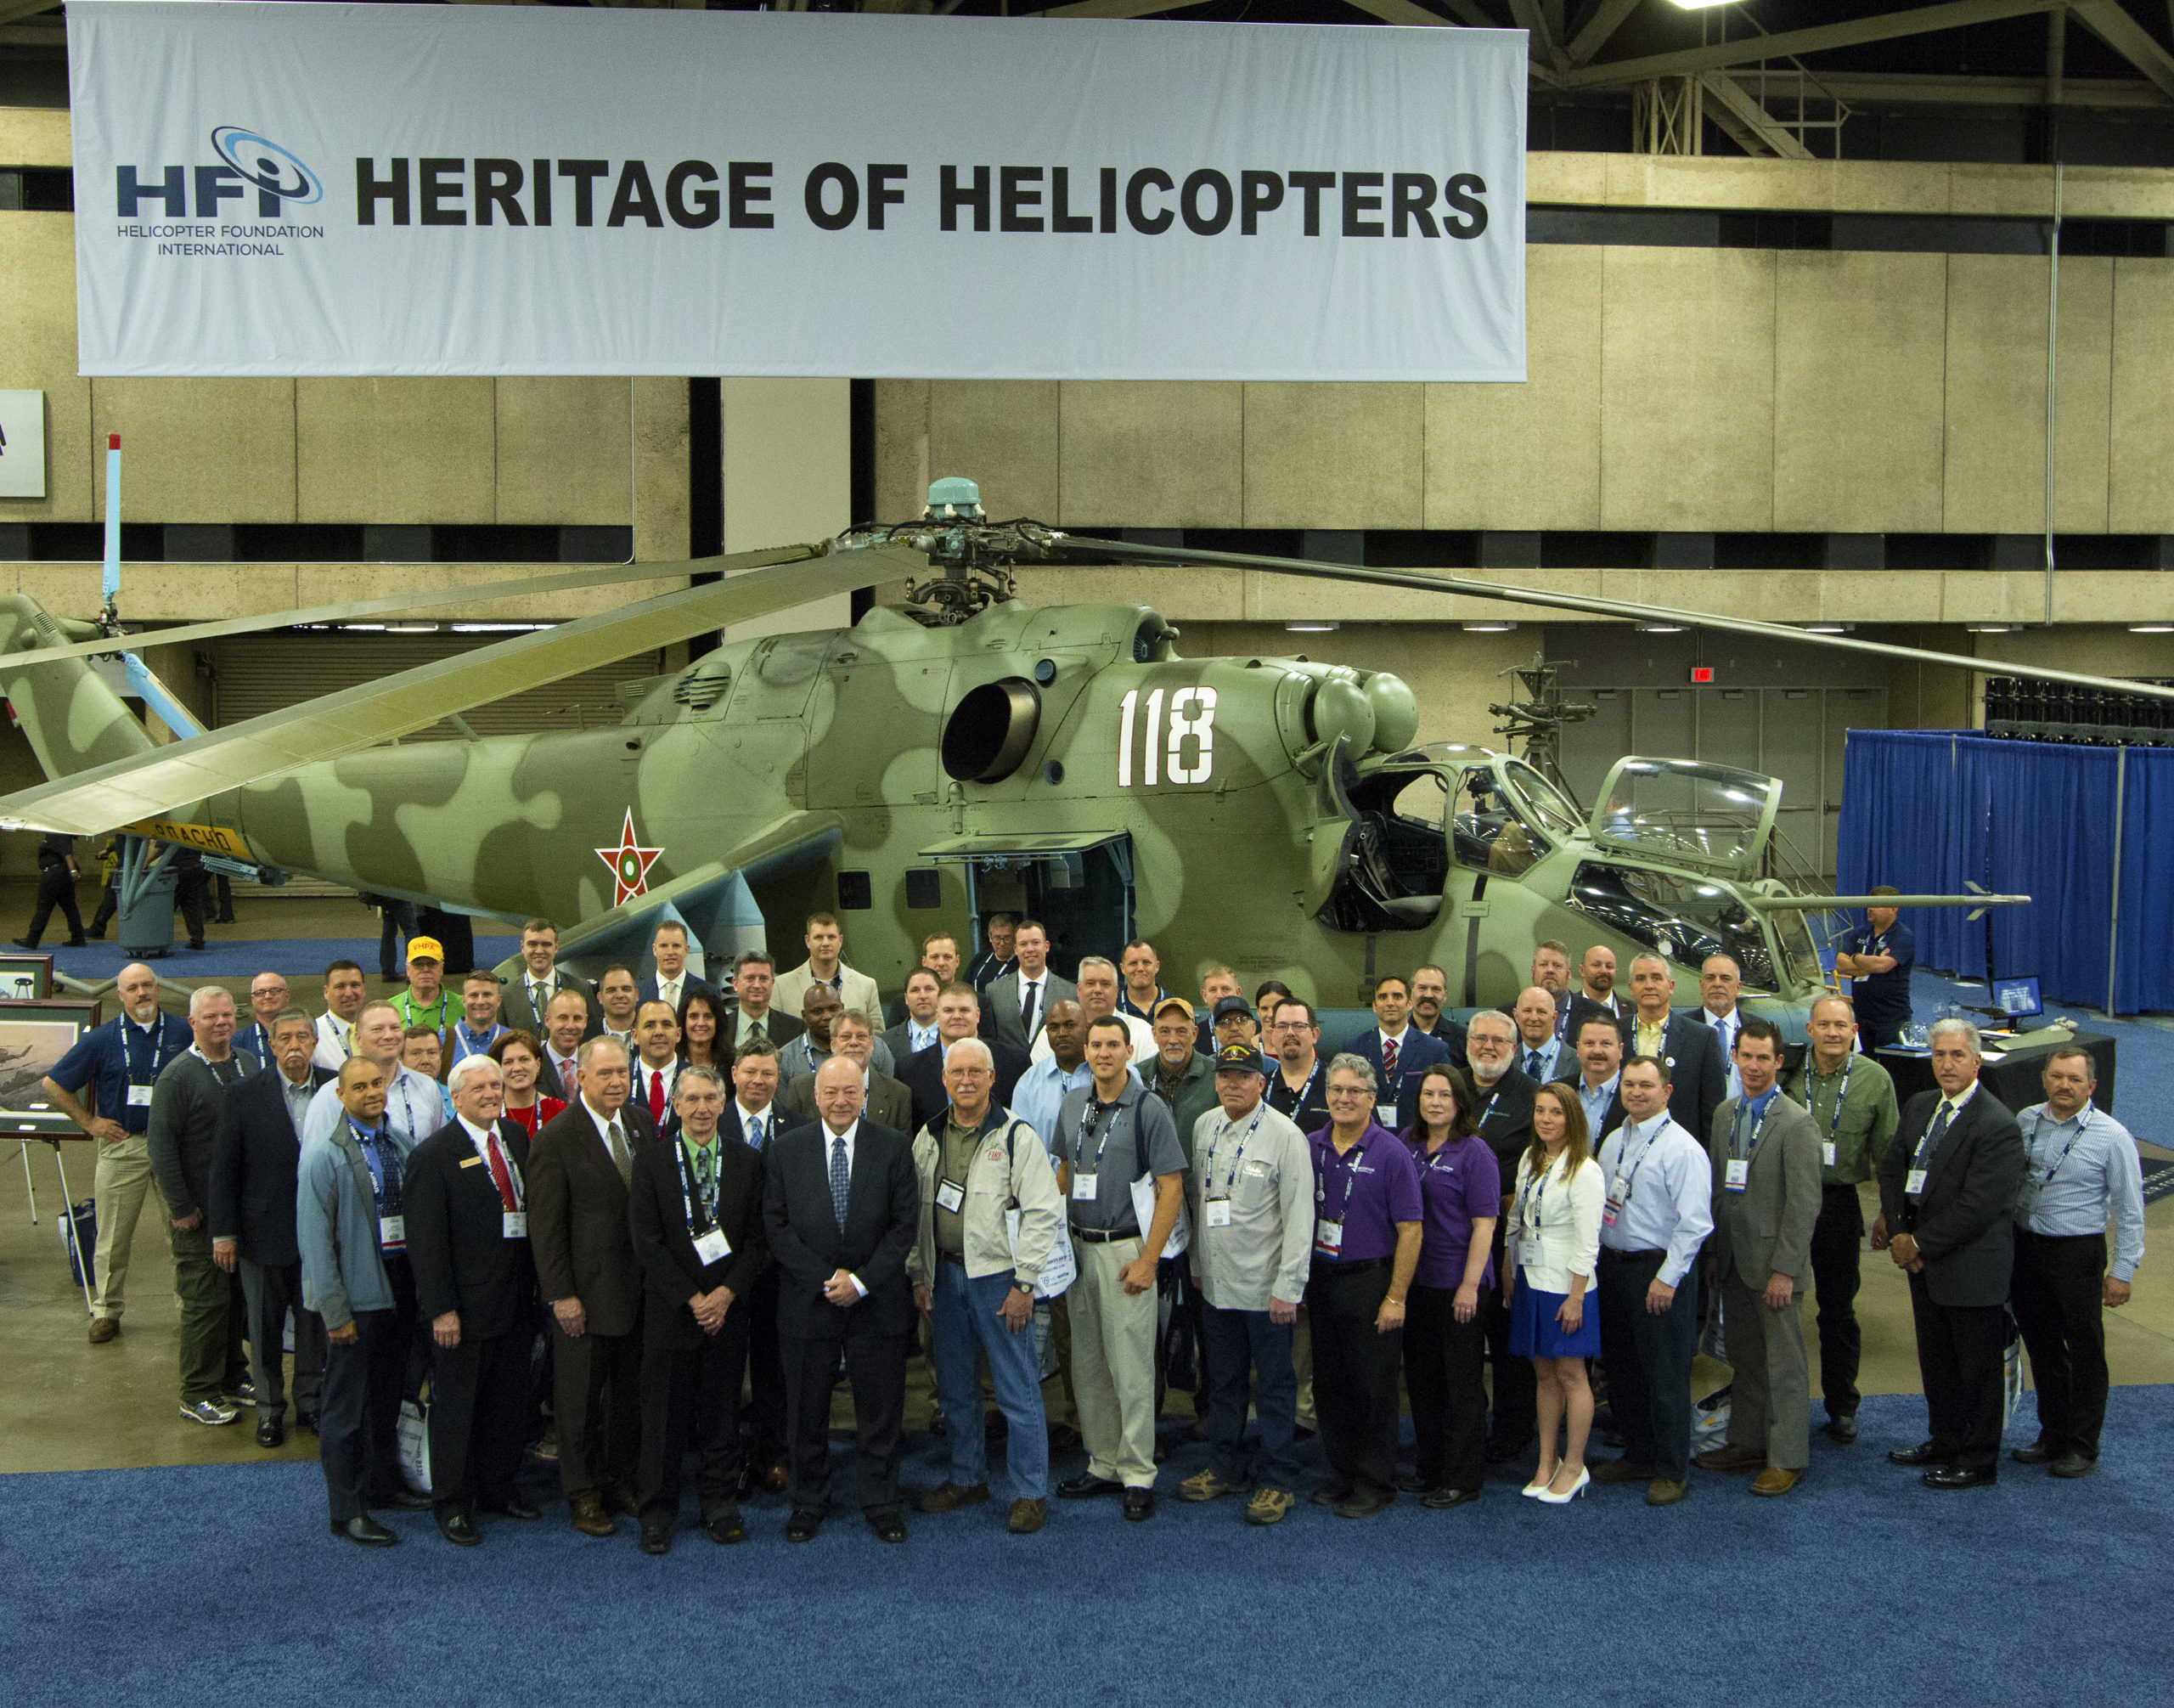 Rotorcorp Participates in “Salute To Veterans” at 2017 HELI-EXPO